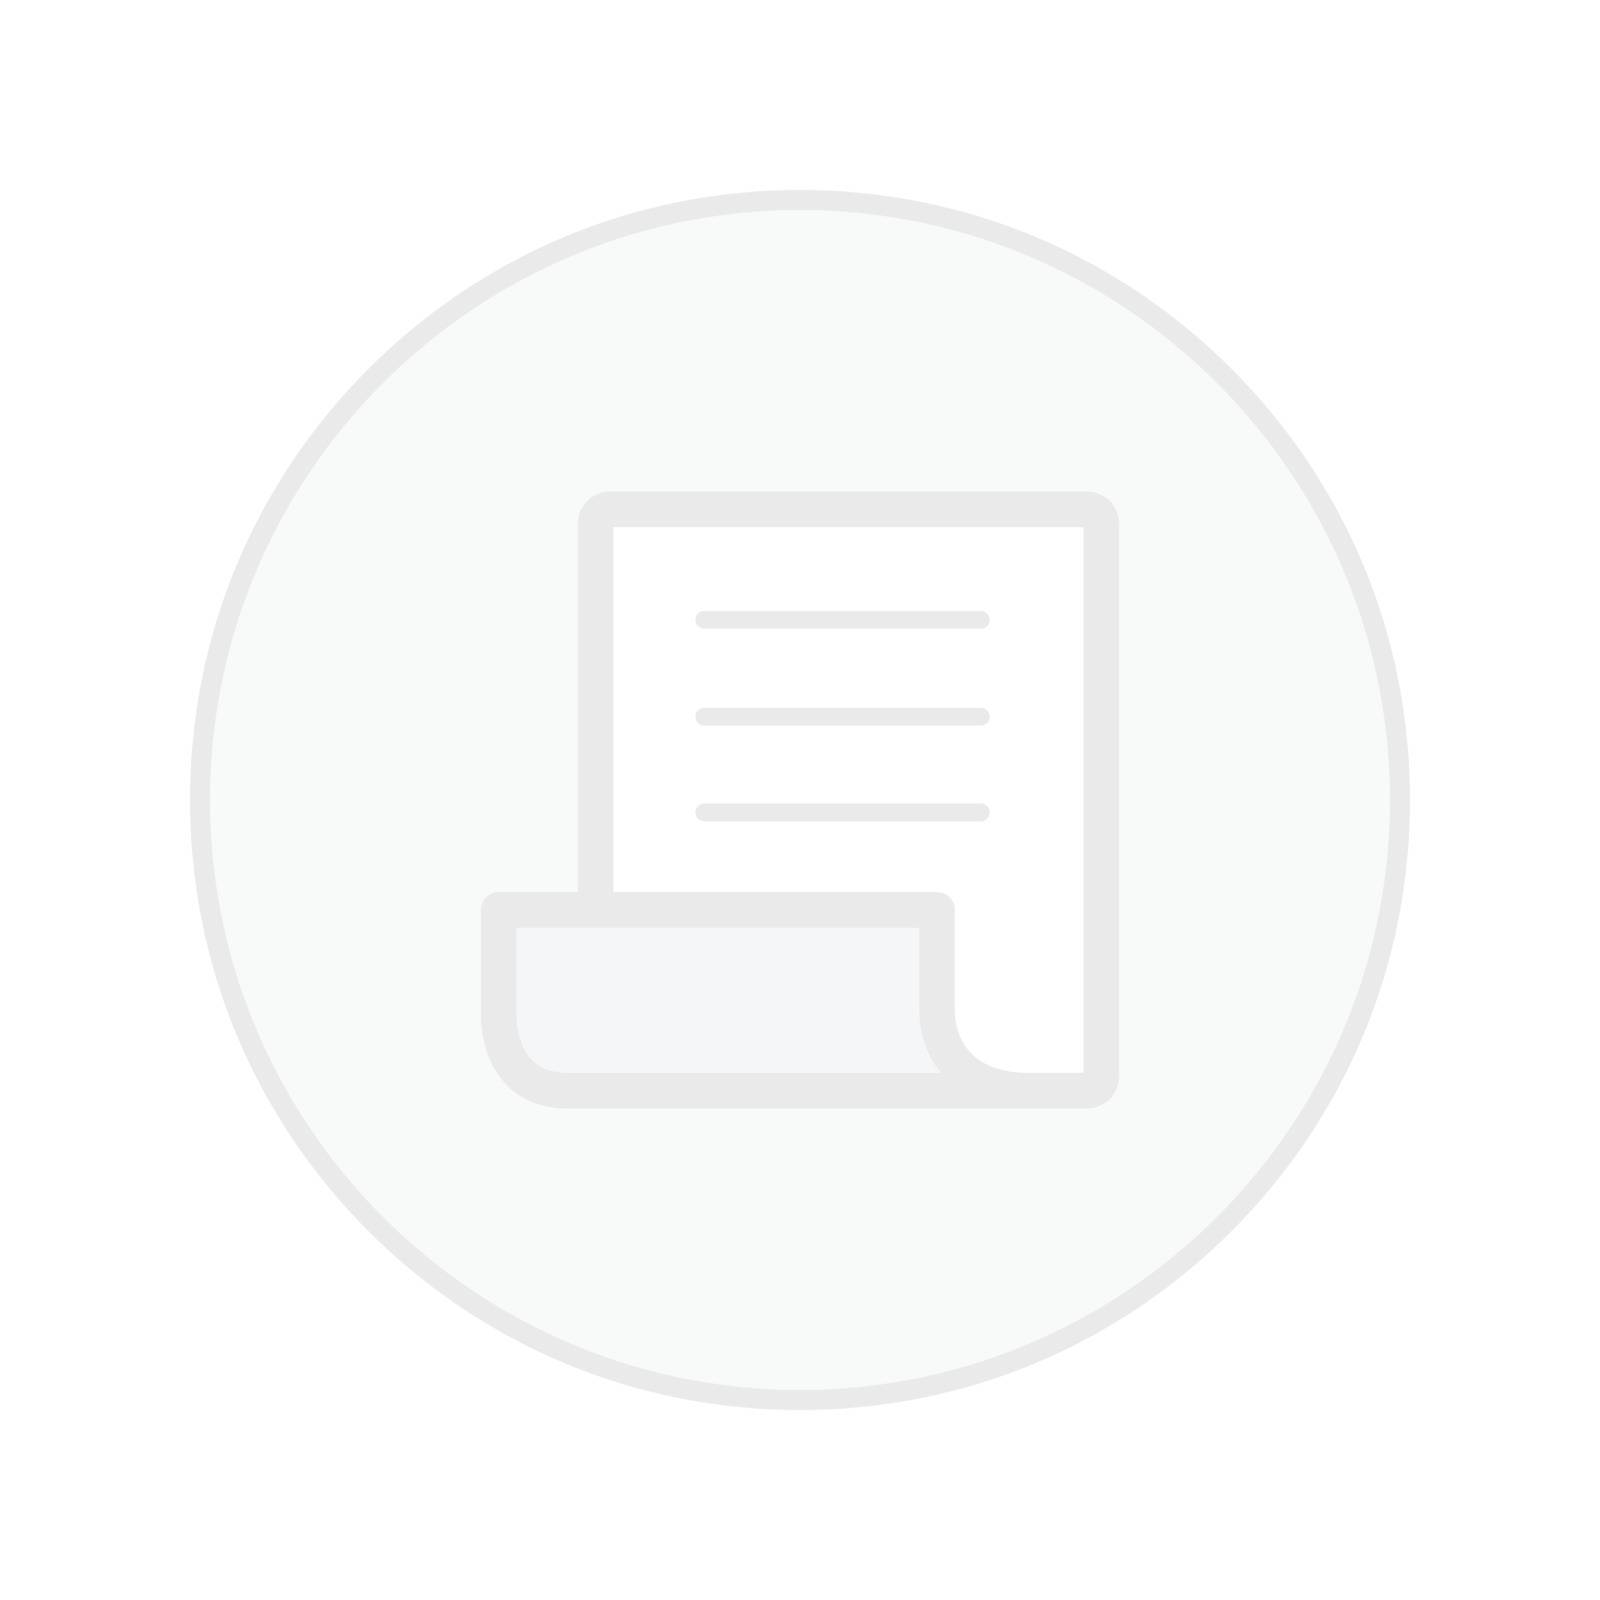 office paper white button icon by PAPAGraph